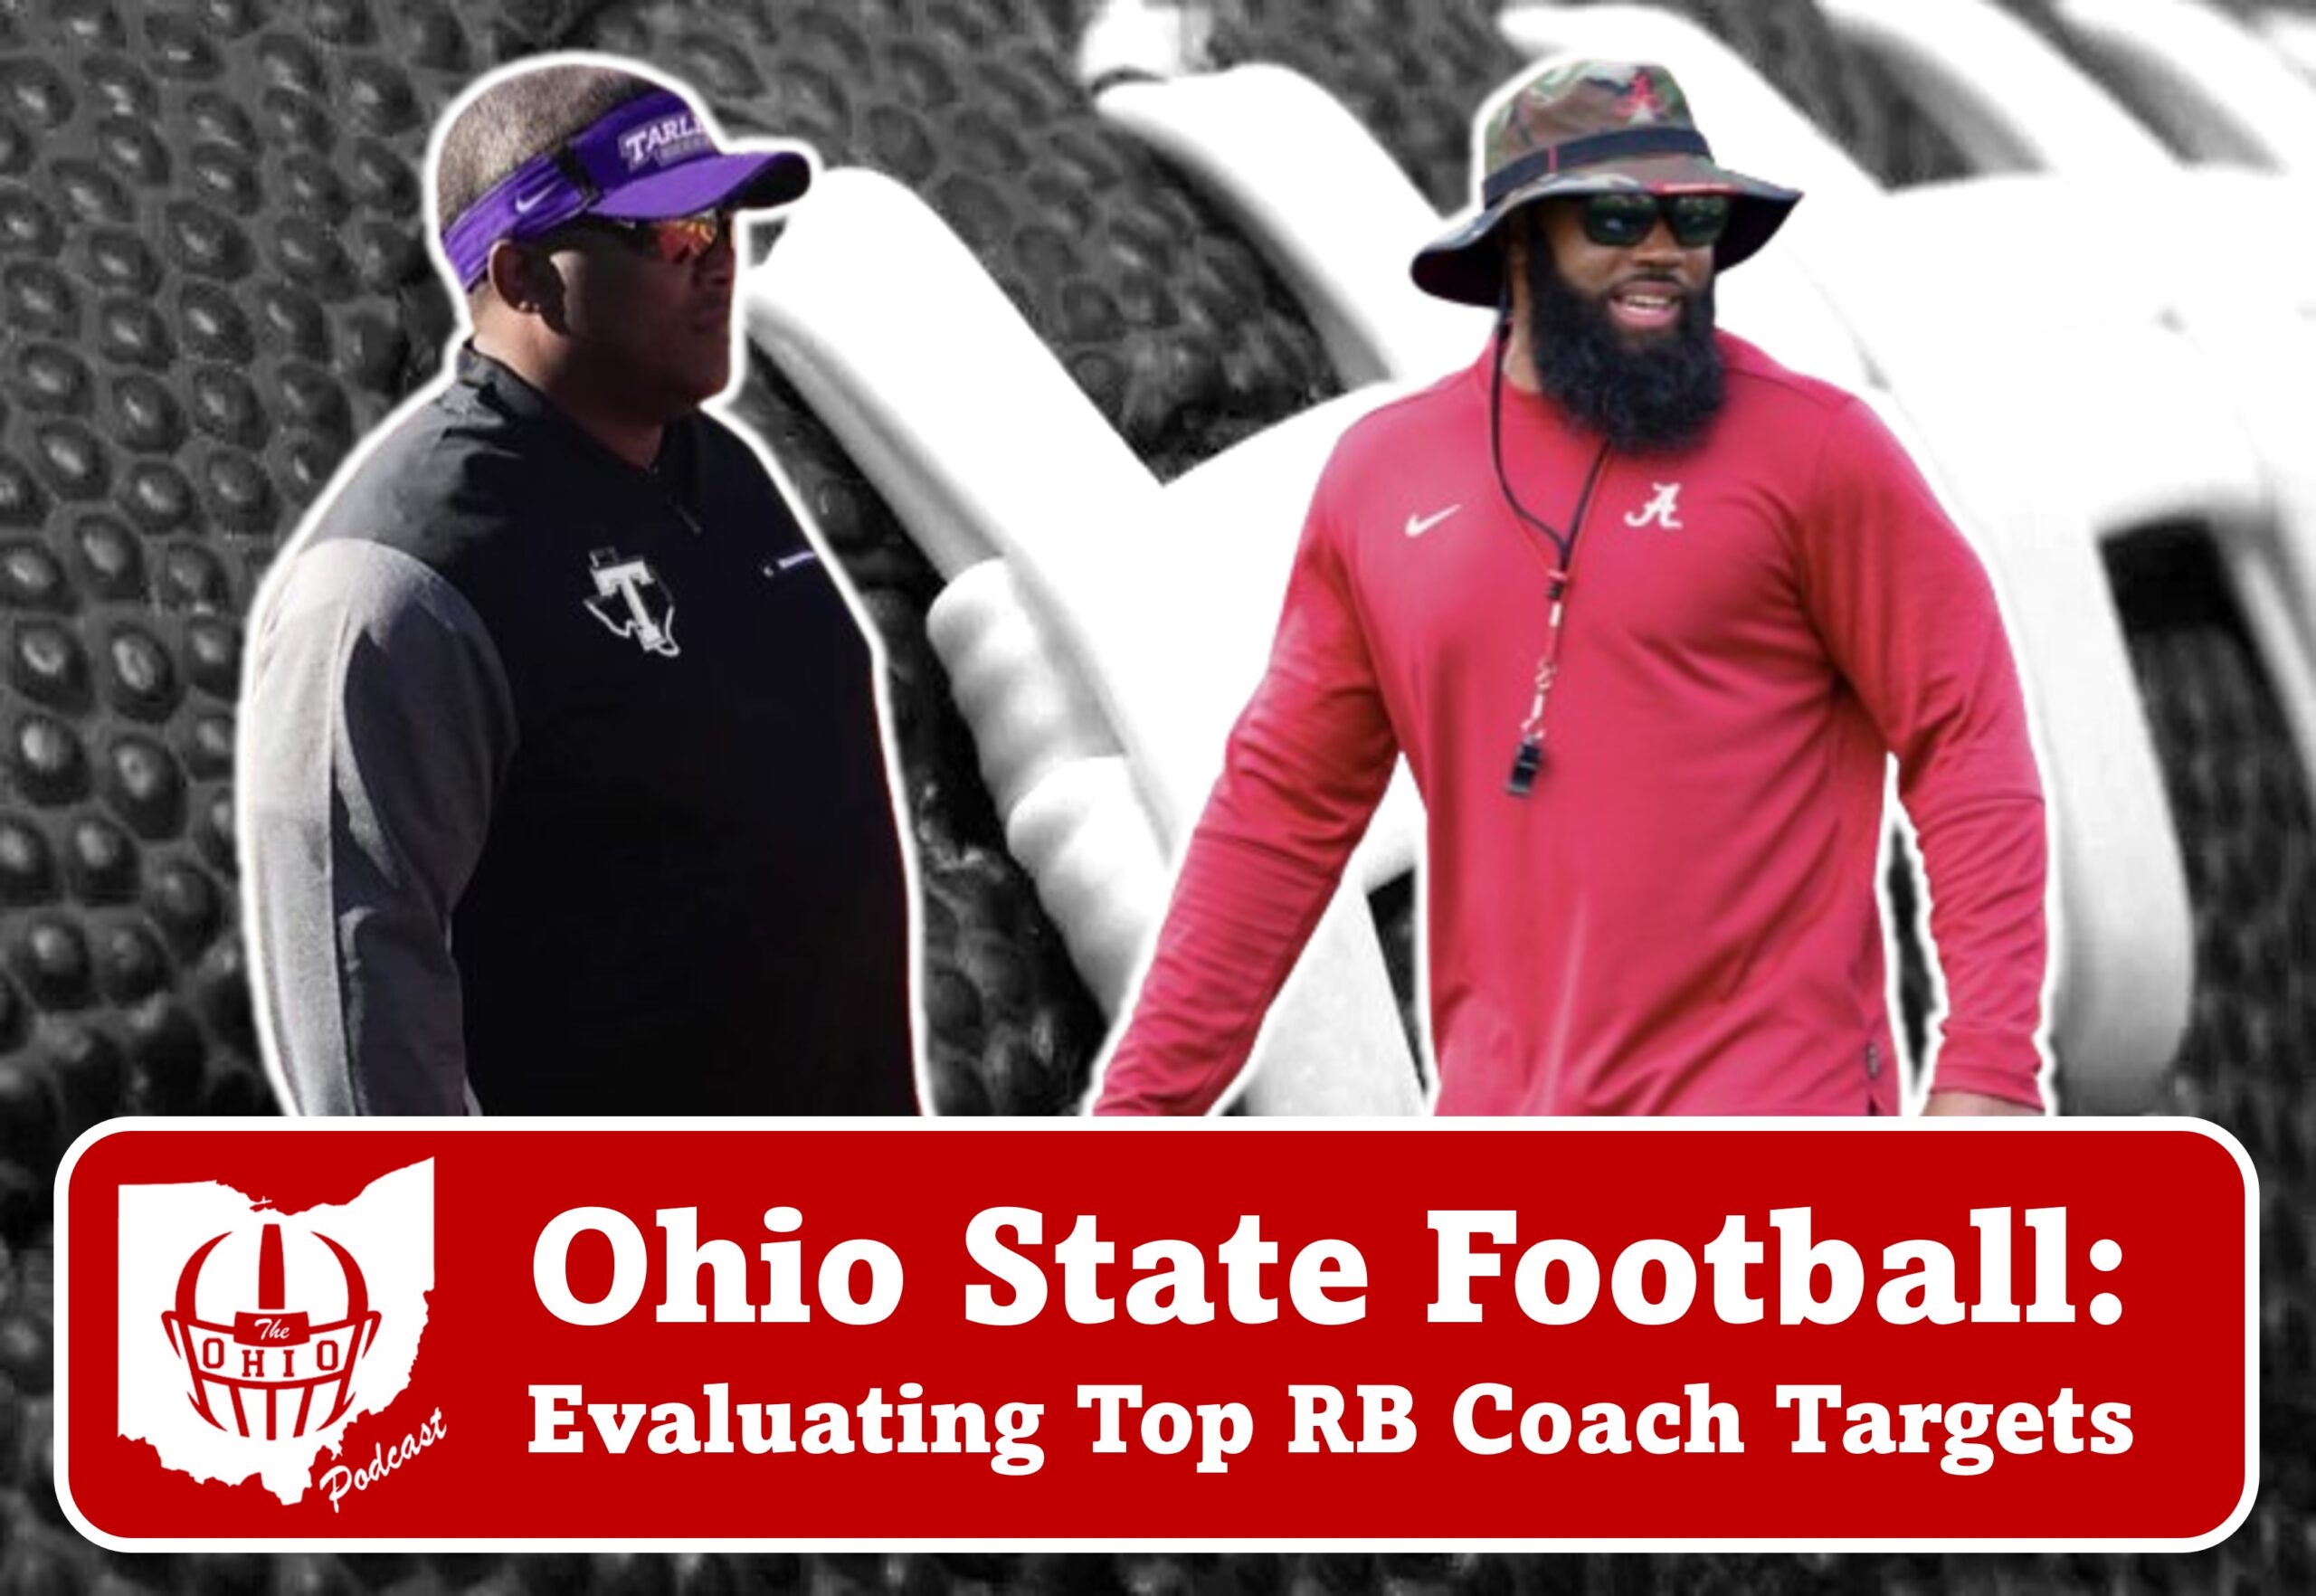 Evaluating Top RB Coach Targets